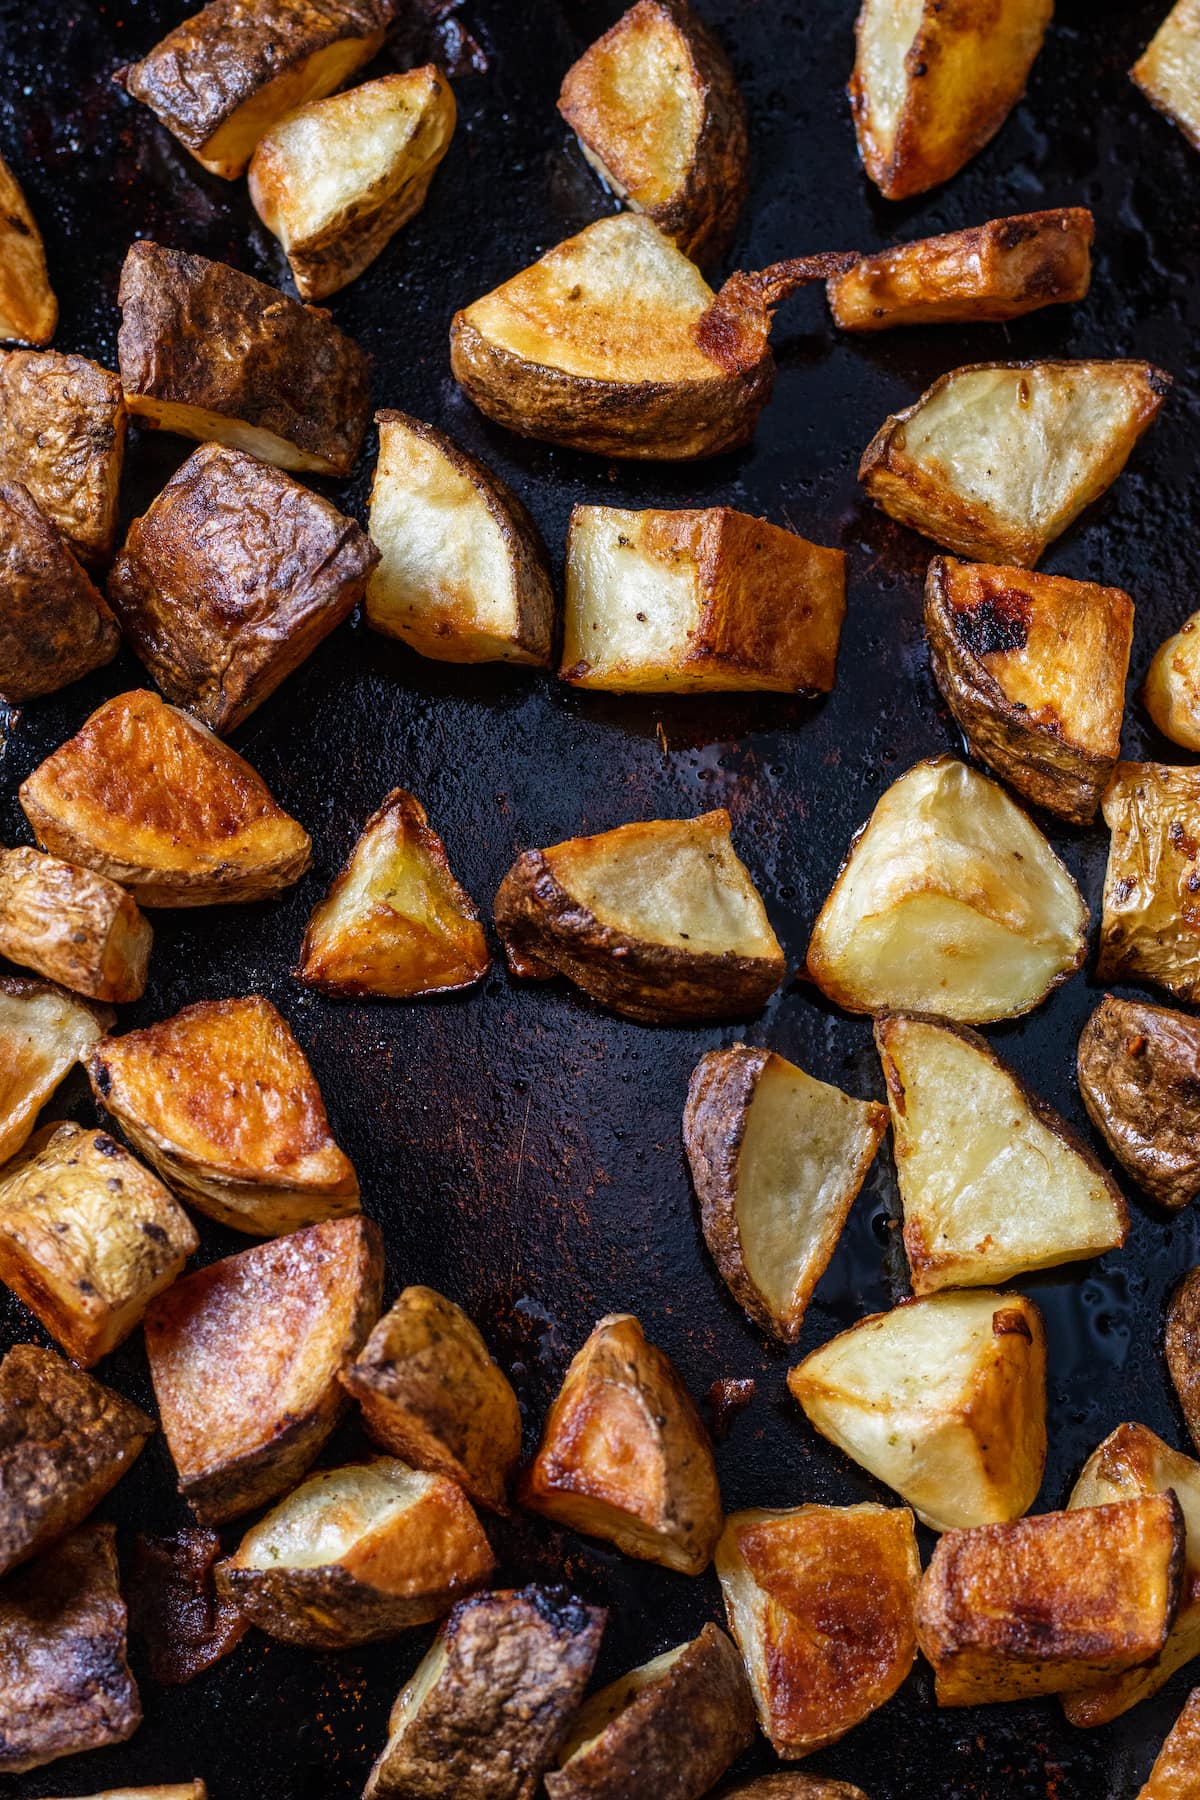 Darkly crips roasted potatoes on a lightly oiled deeply blackened cookie sheet